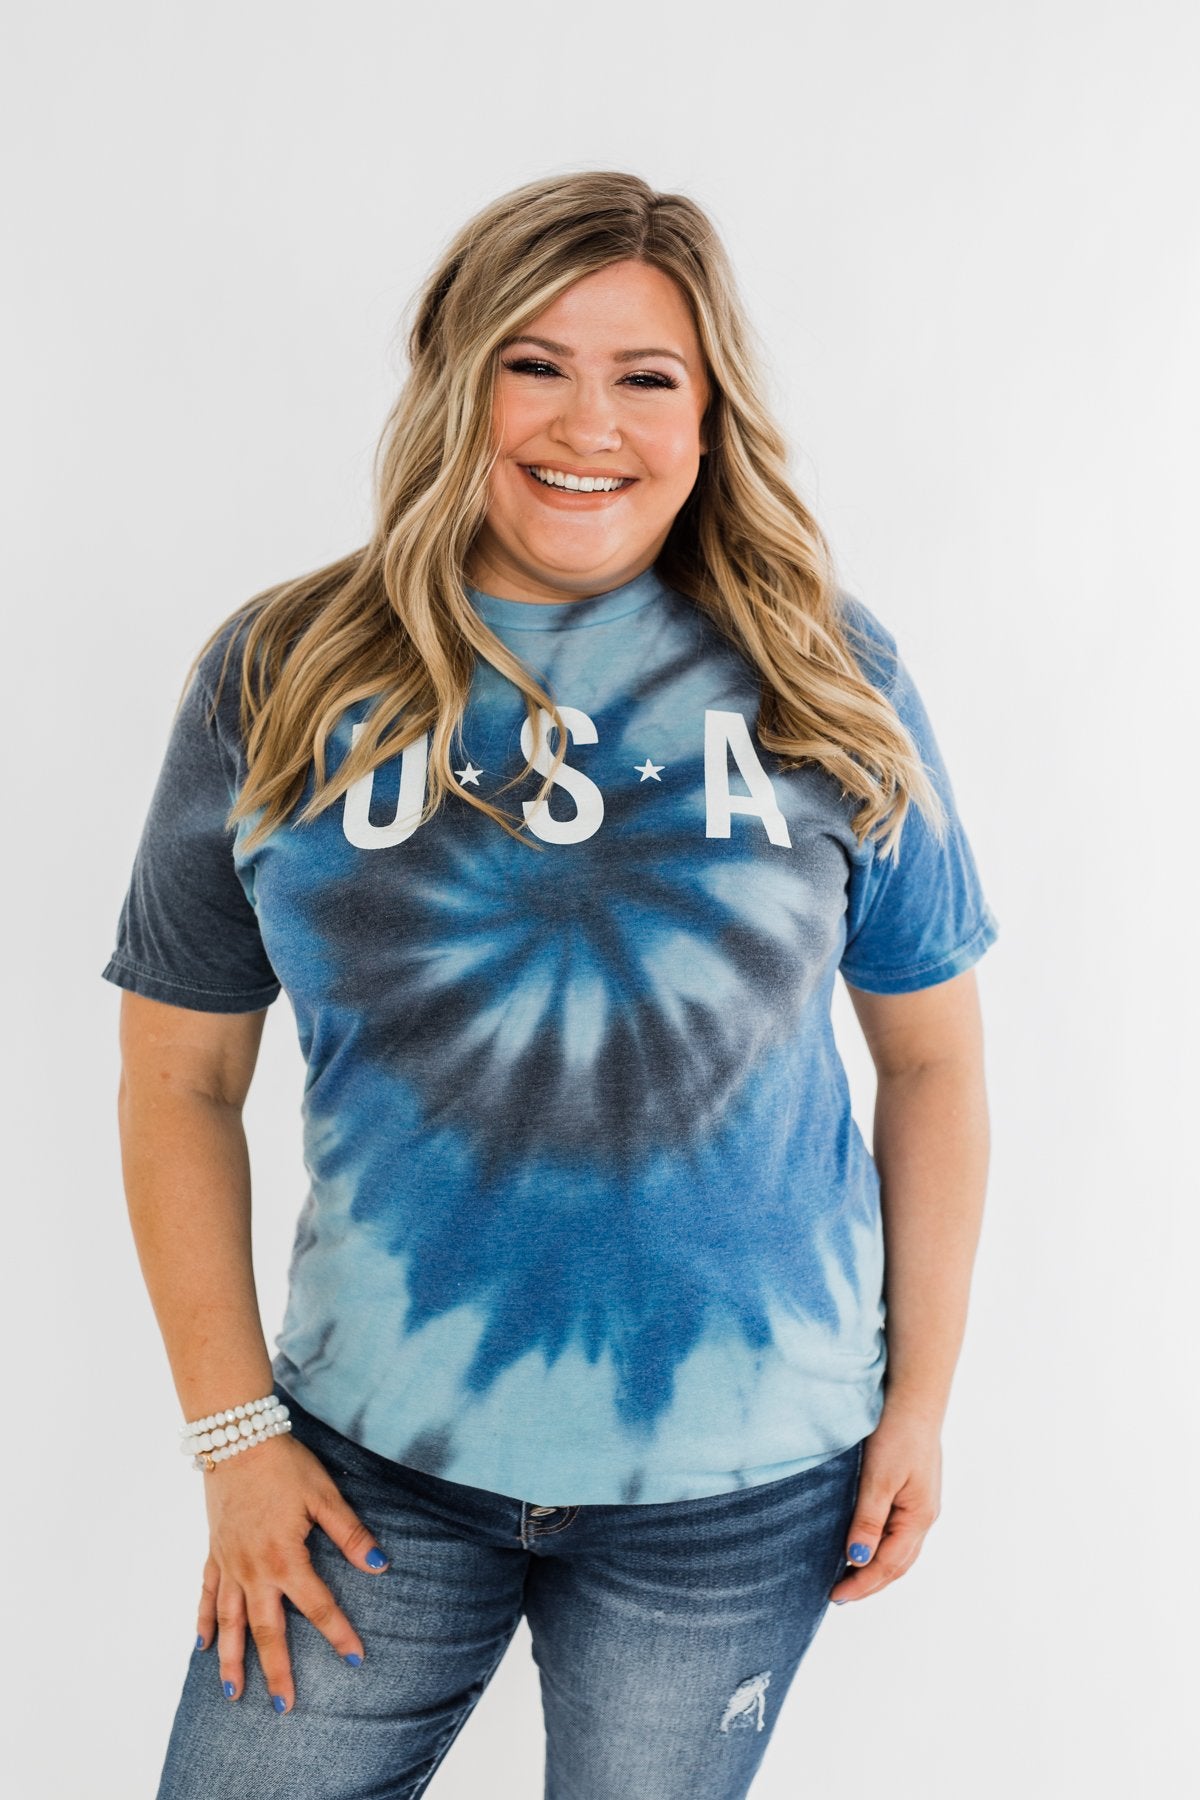 "USA" Tie Dye Burnout Graphic Tee- Shades of Blue